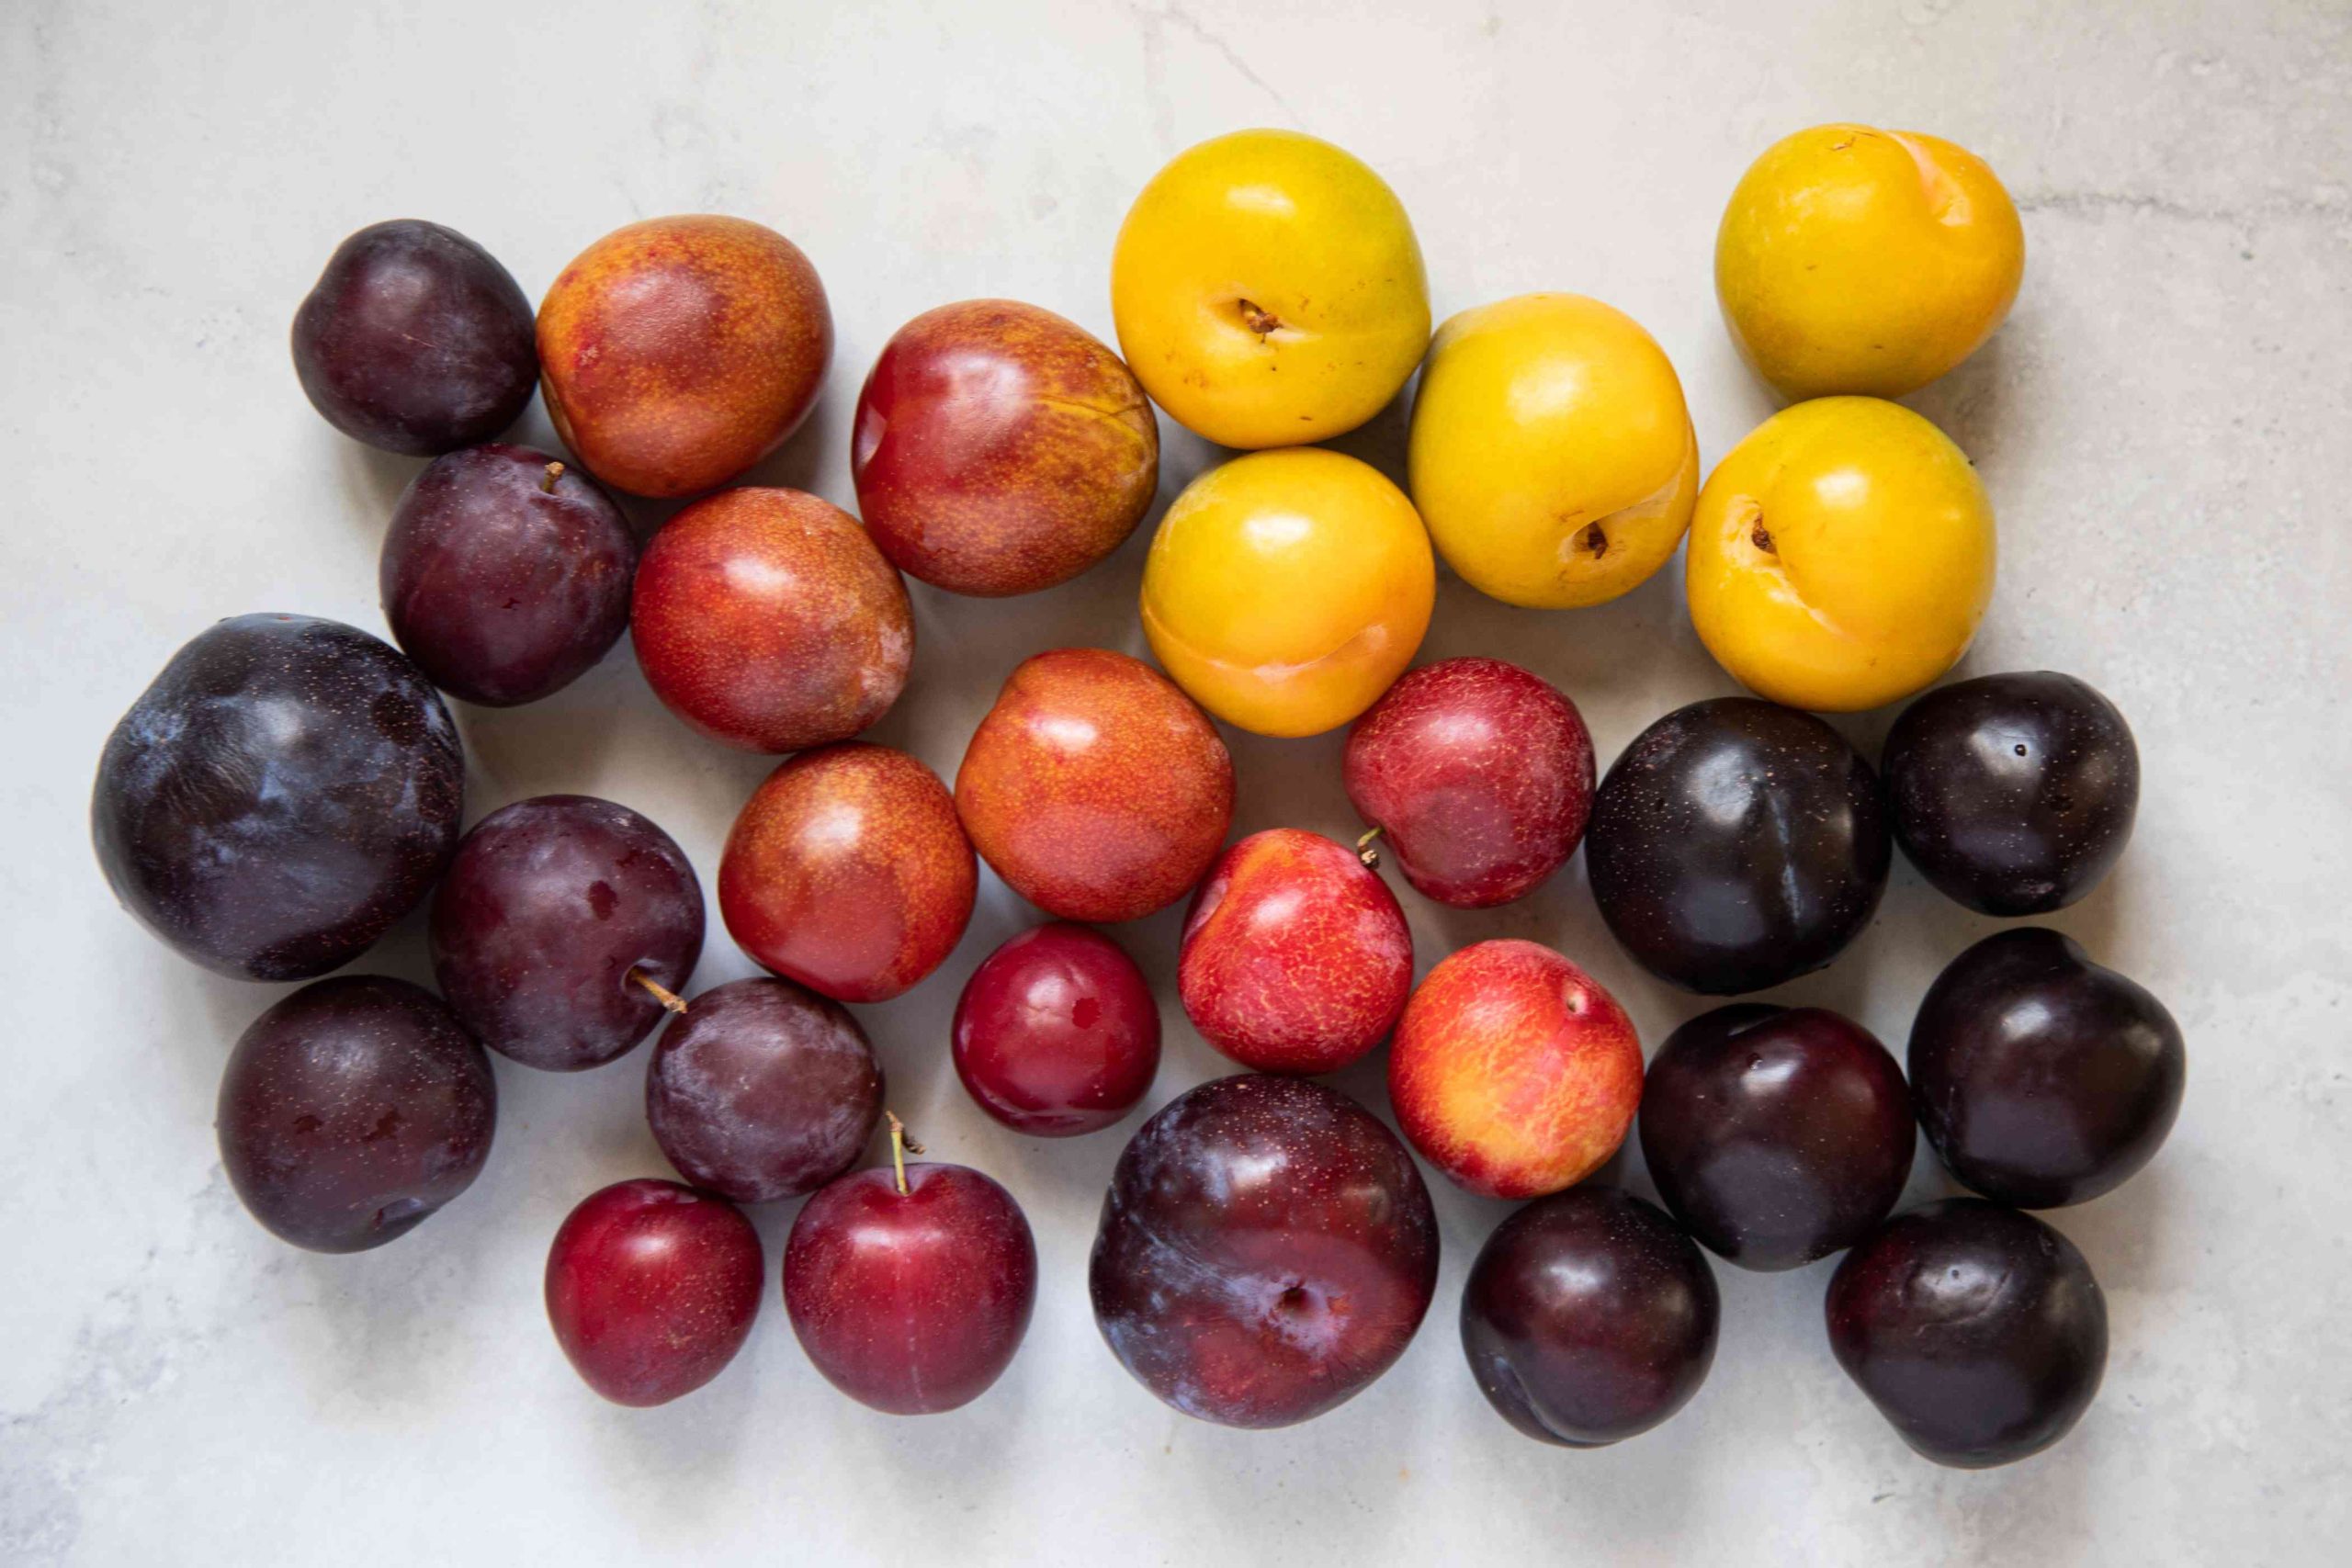 Factors that Affect the Sweetness of Plums